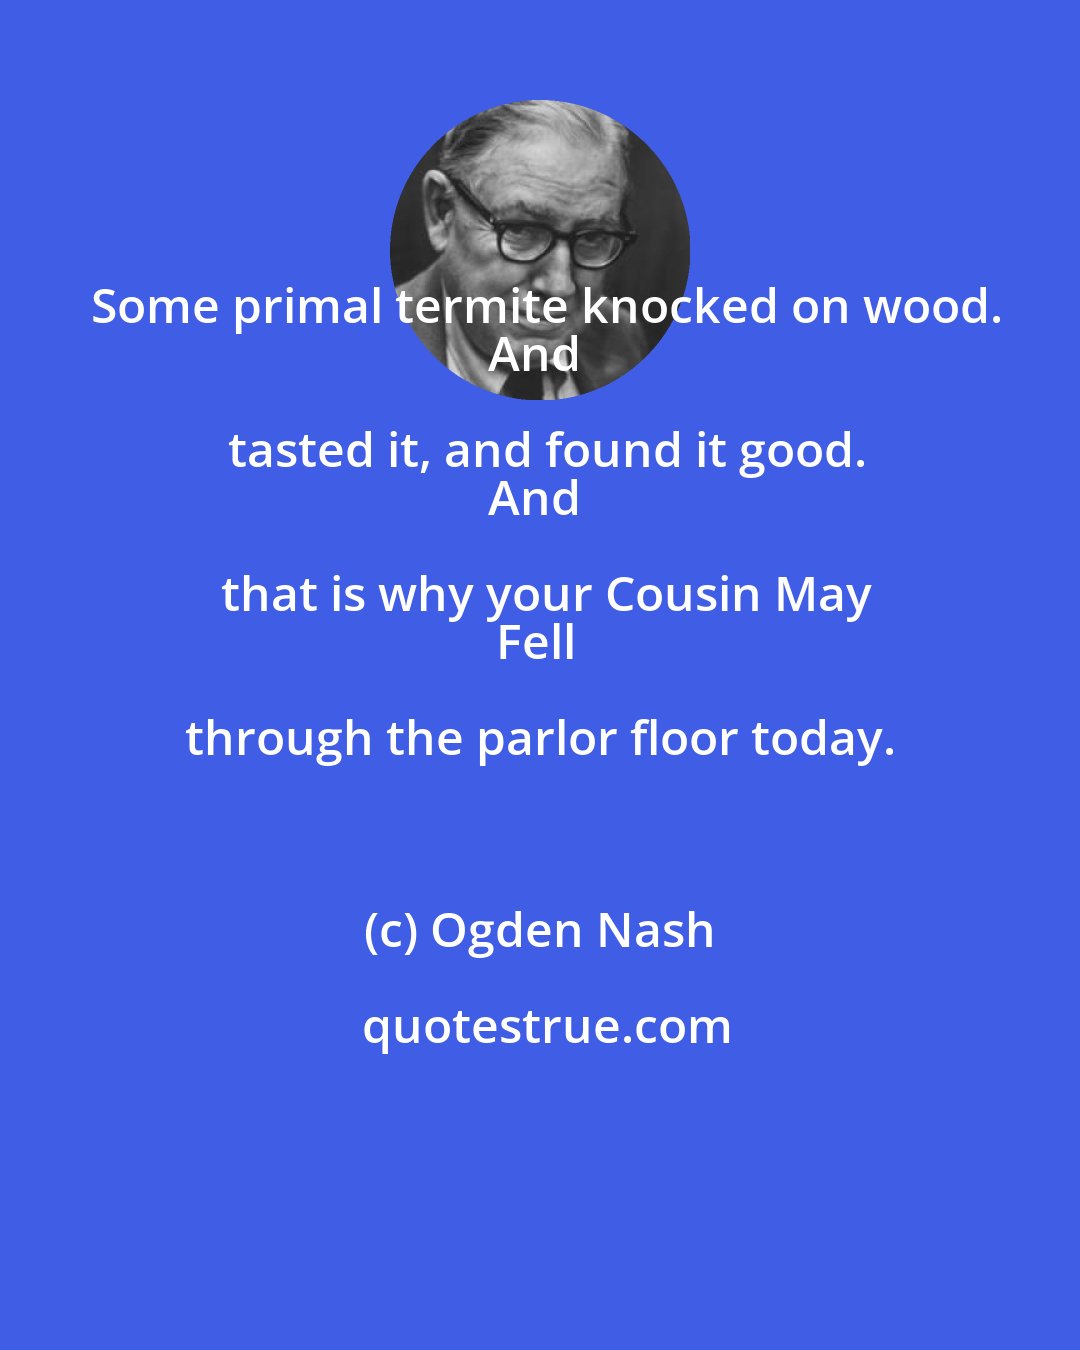 Ogden Nash: Some primal termite knocked on wood.
And tasted it, and found it good.
And that is why your Cousin May
Fell through the parlor floor today.